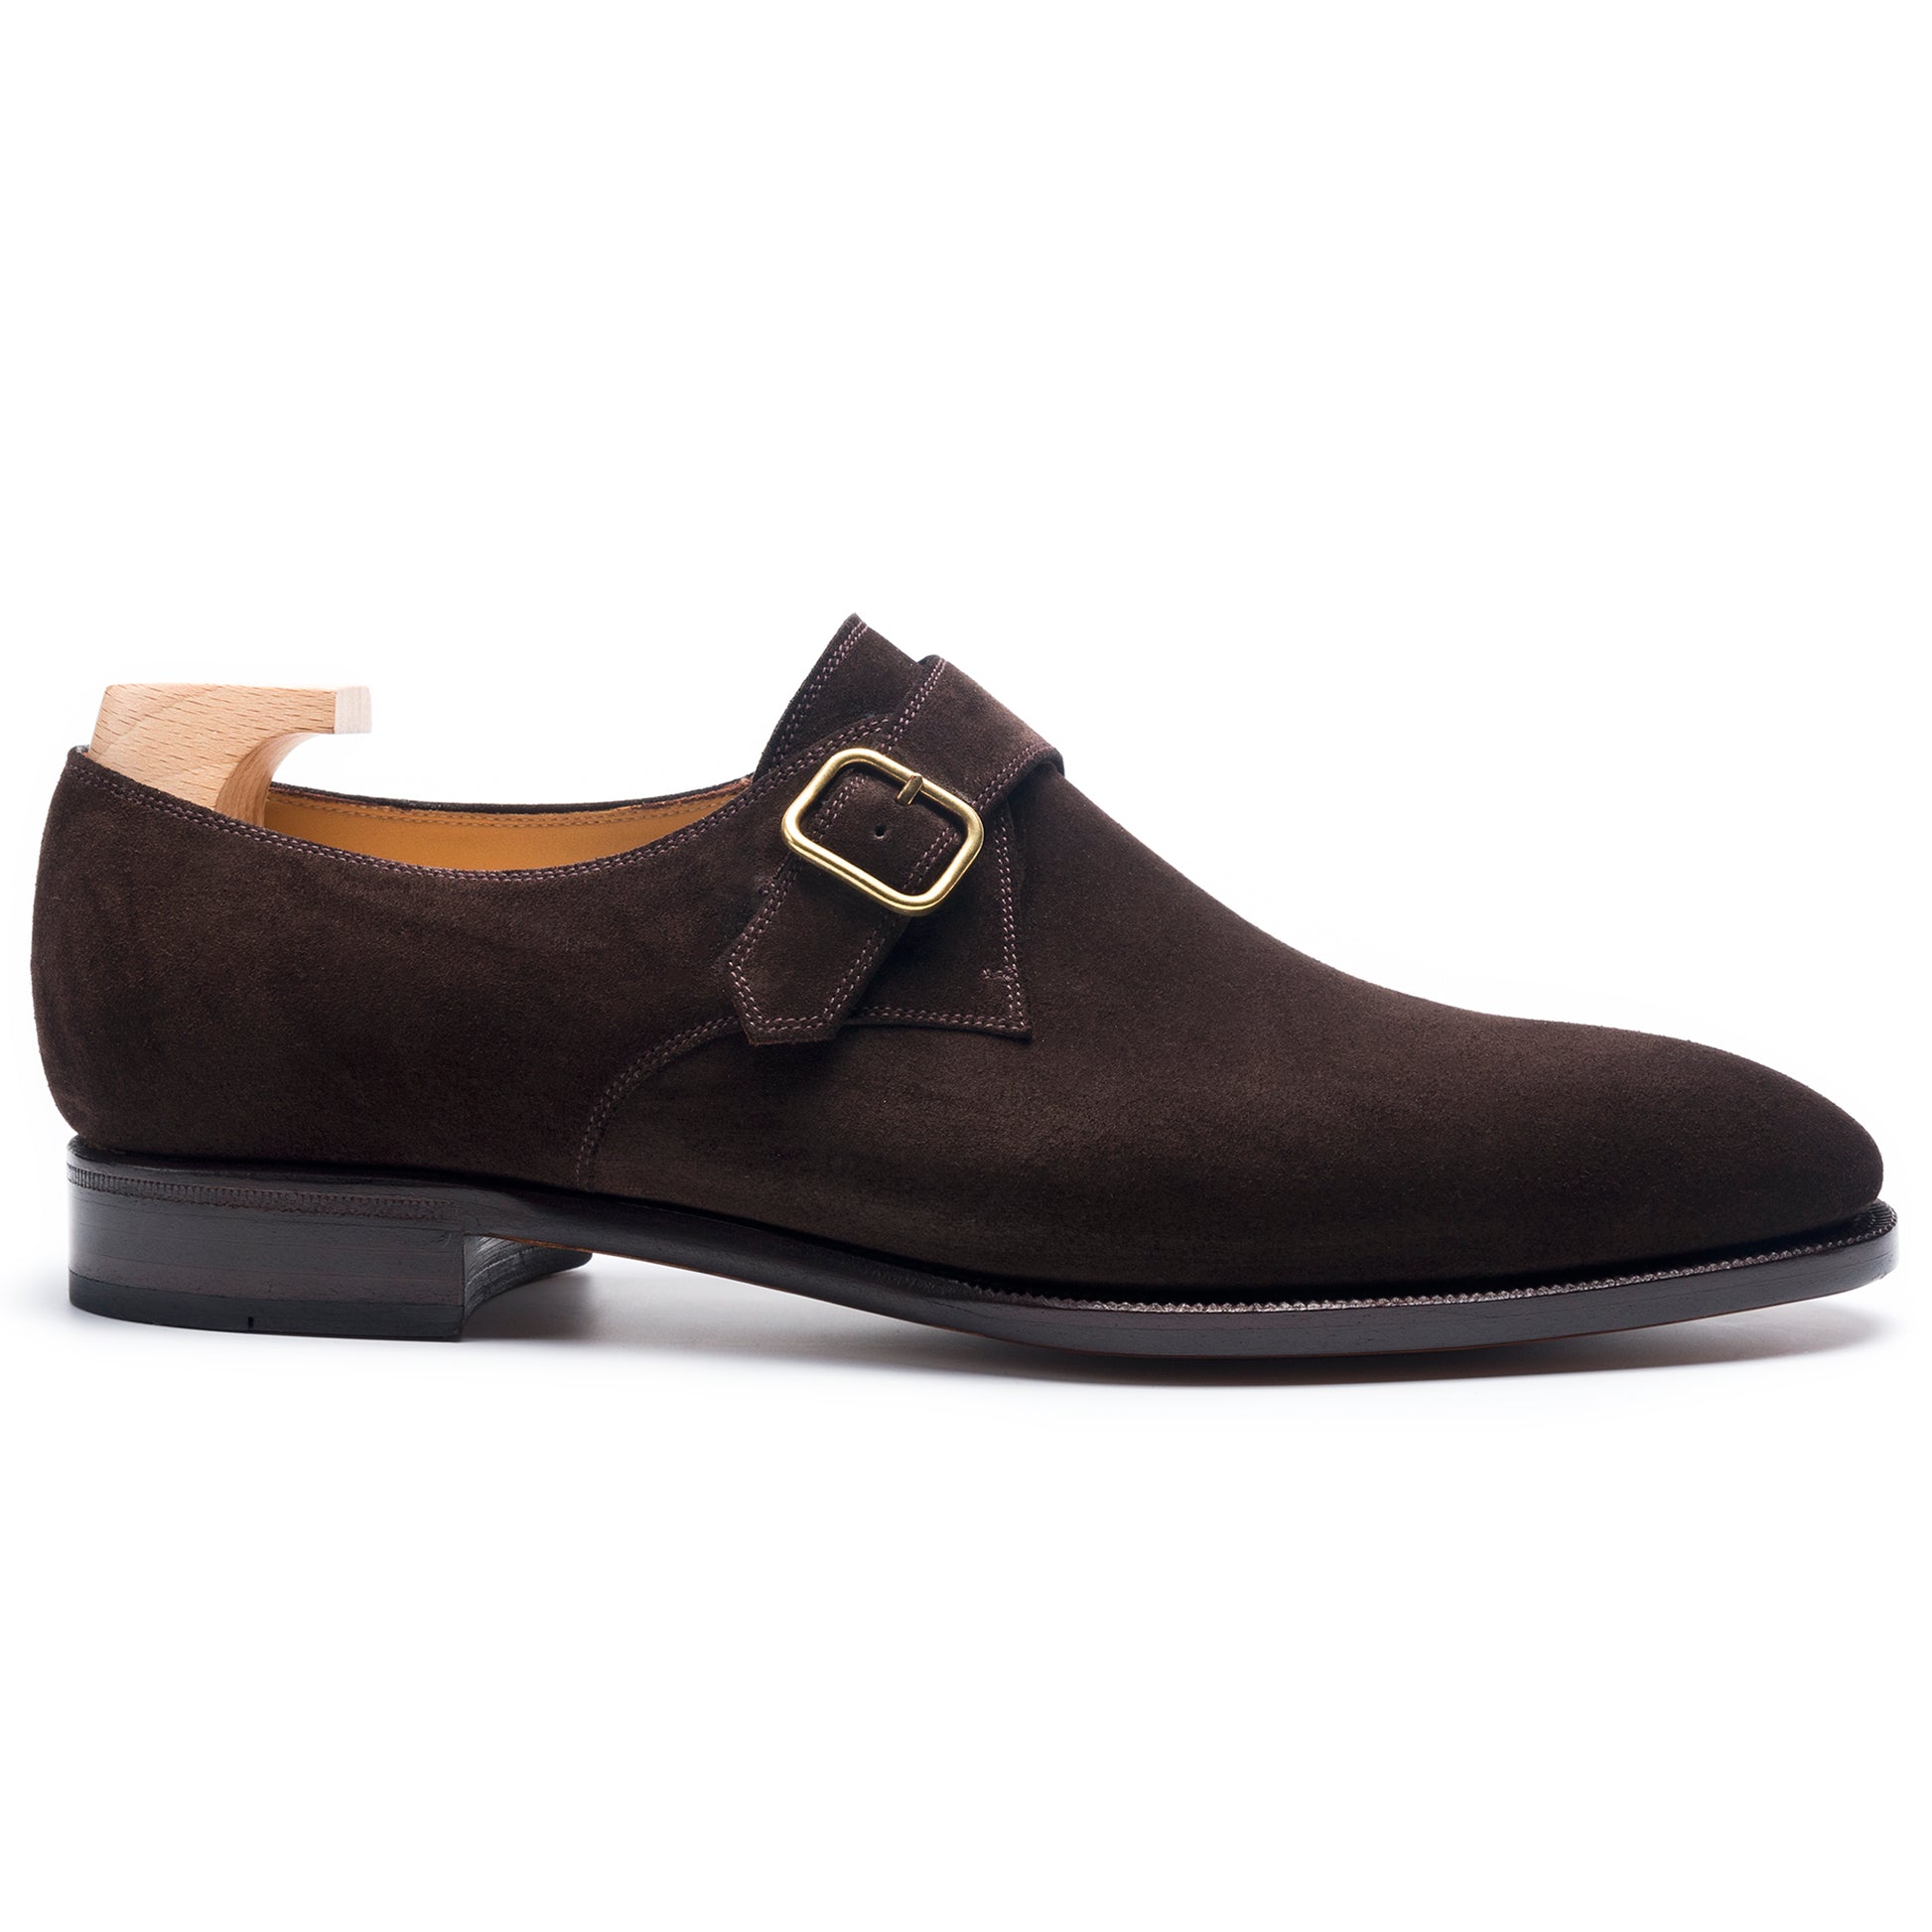 TLB Mallorca leather shoes 196 / GOYA / SUEDE BROWN / GOLD